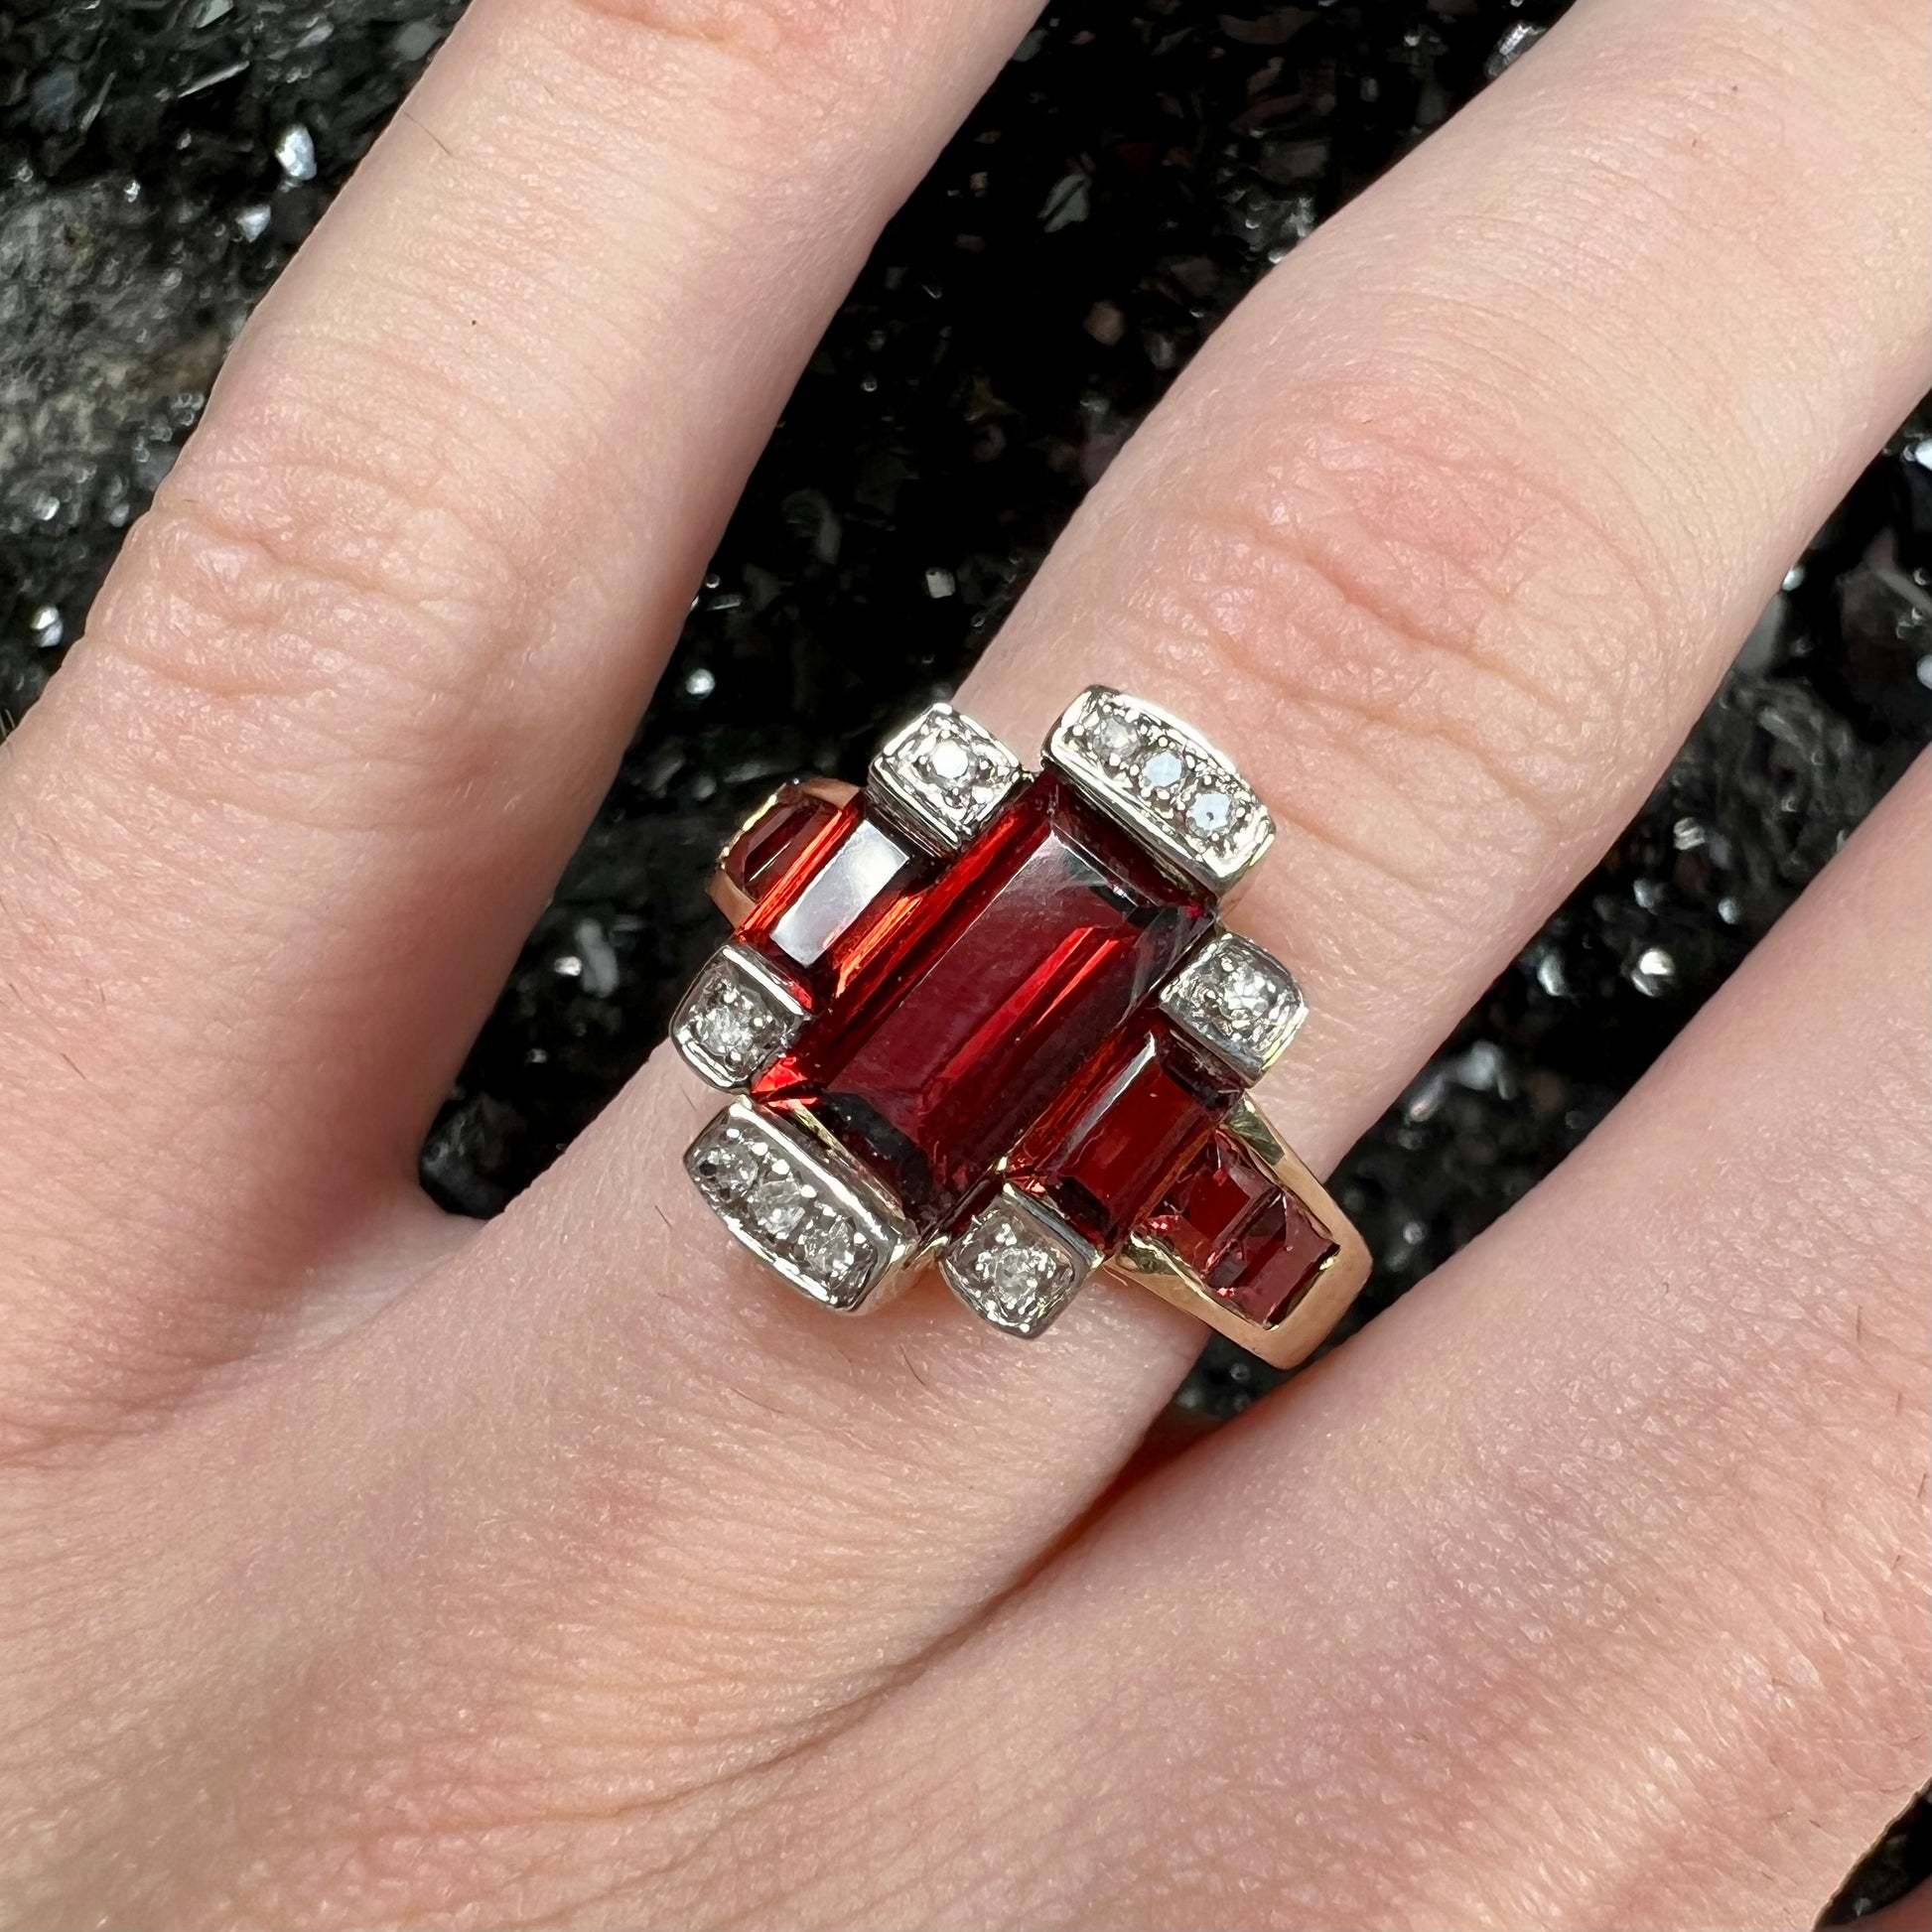 An Art Deco style emerald cut garnet and diamond ring cast in yellow gold.